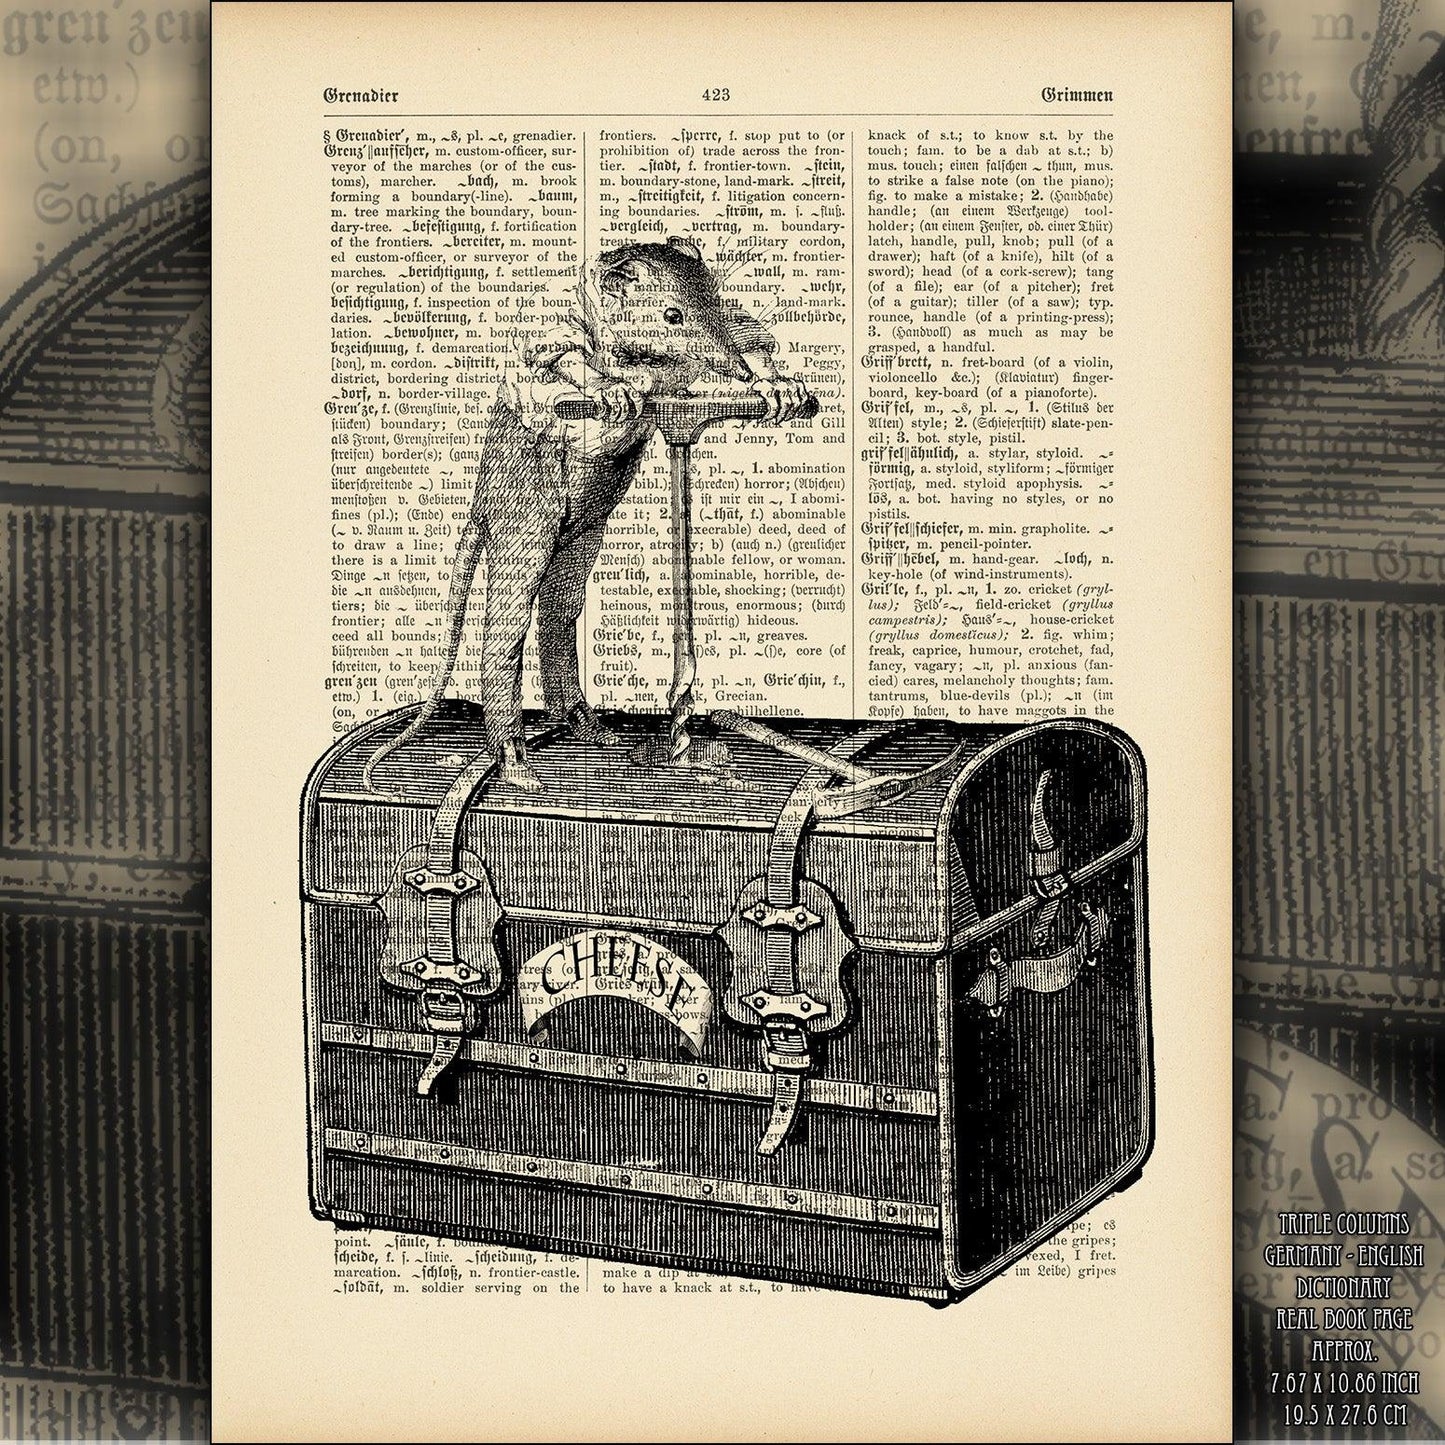 Mouse Treasure - Literary Poster Gift, Victorian Dictionary Art Poster with Funny Animal Characters - ArtCursor